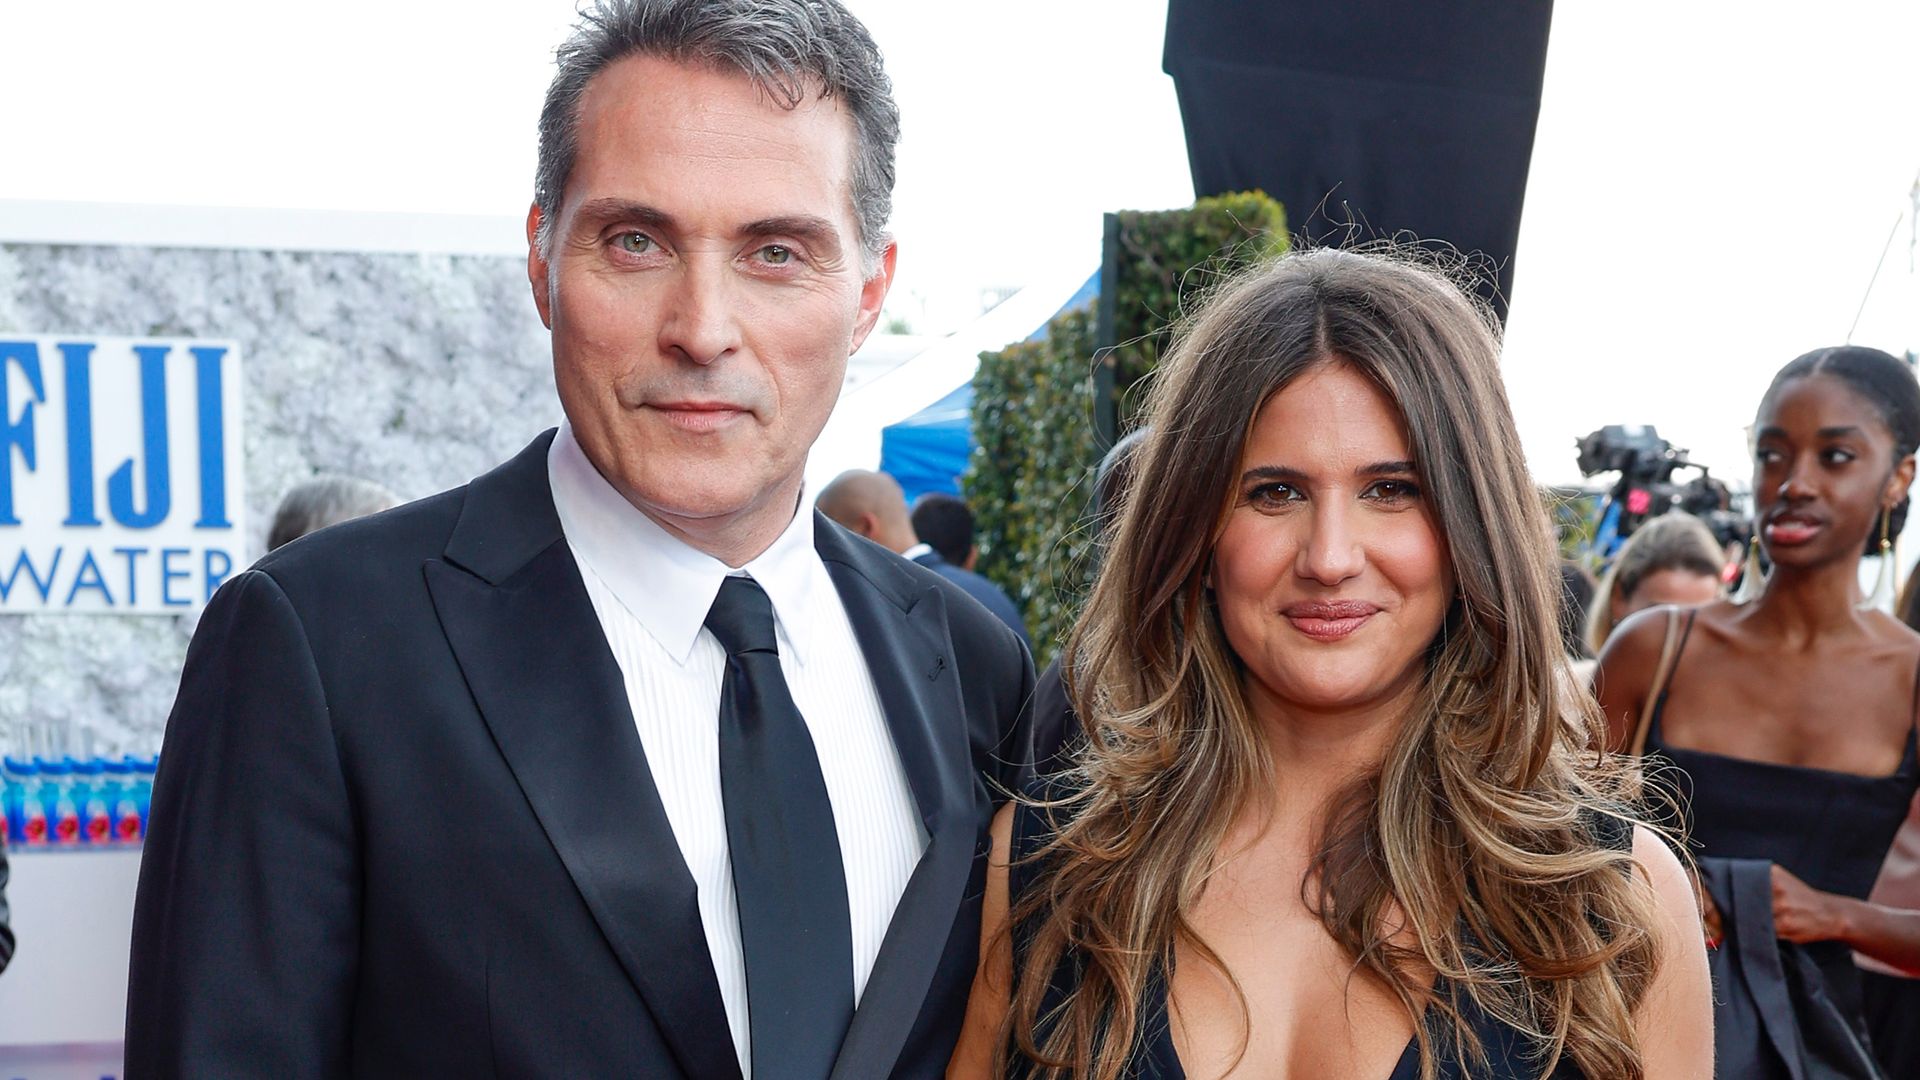 Scoop star Rufus Sewell's, 56, bittersweet engagement to famous fiancée Vivian, 27